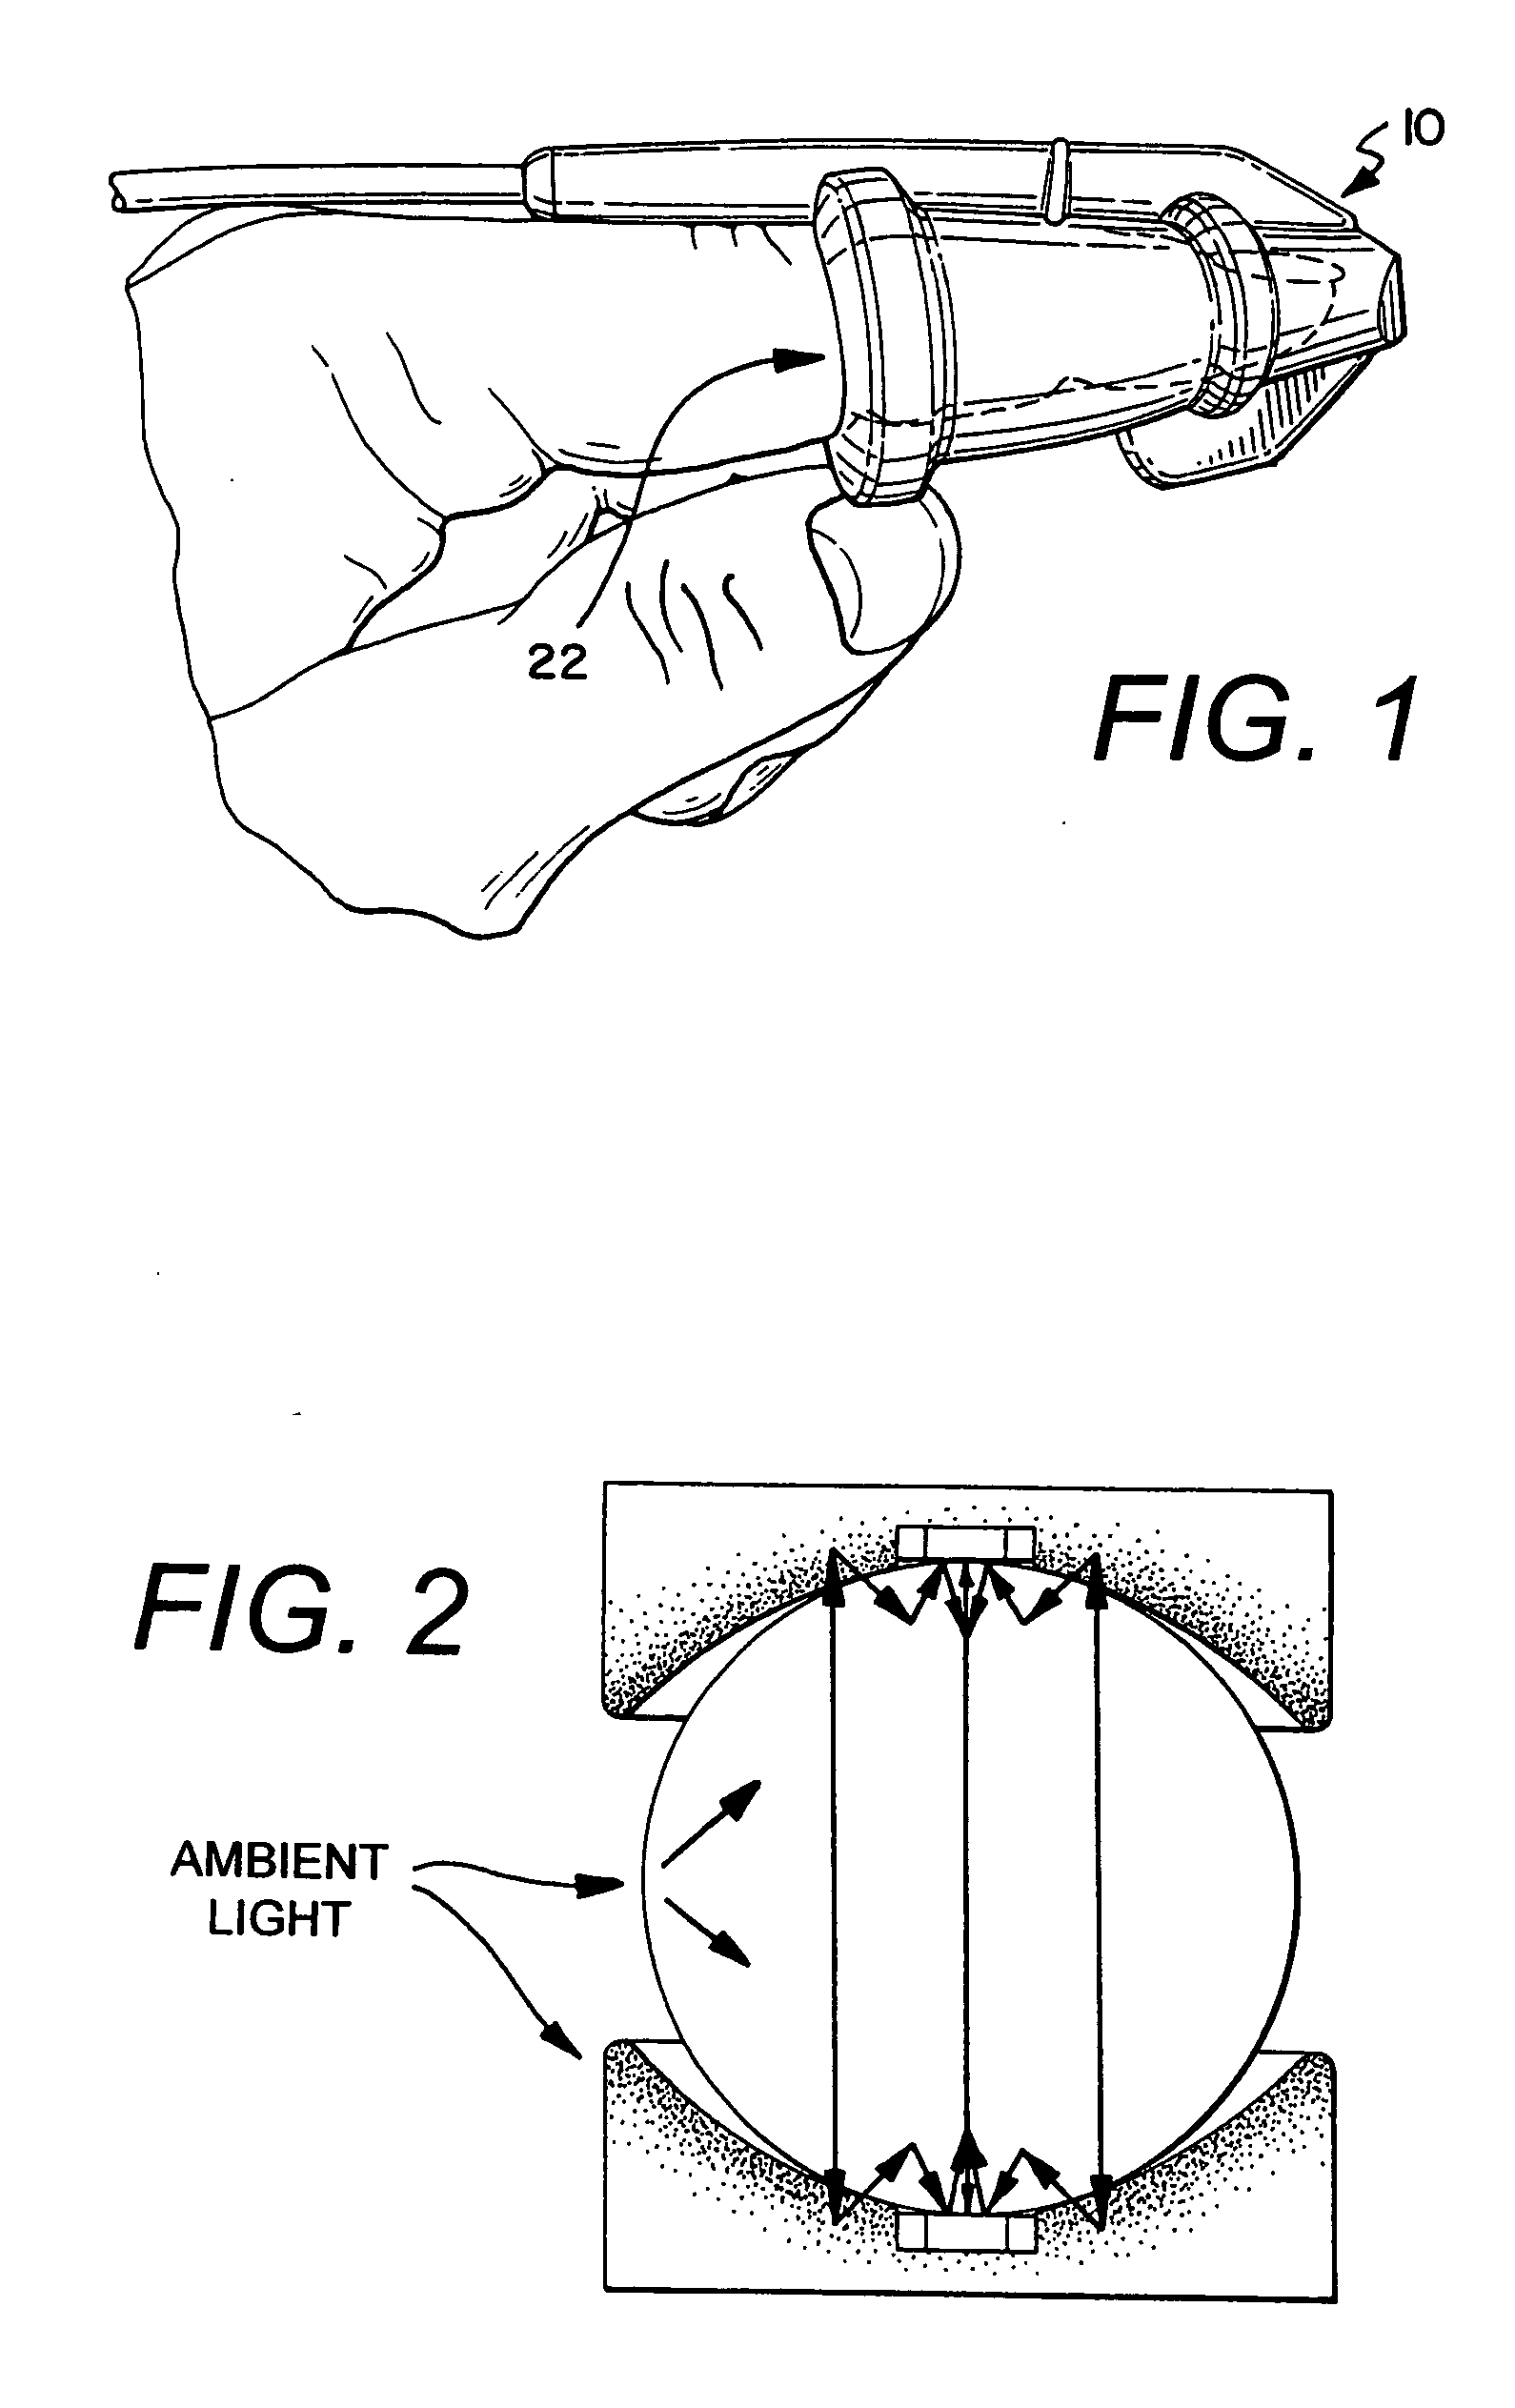 Apparatus for improved pulse oximetry measurement